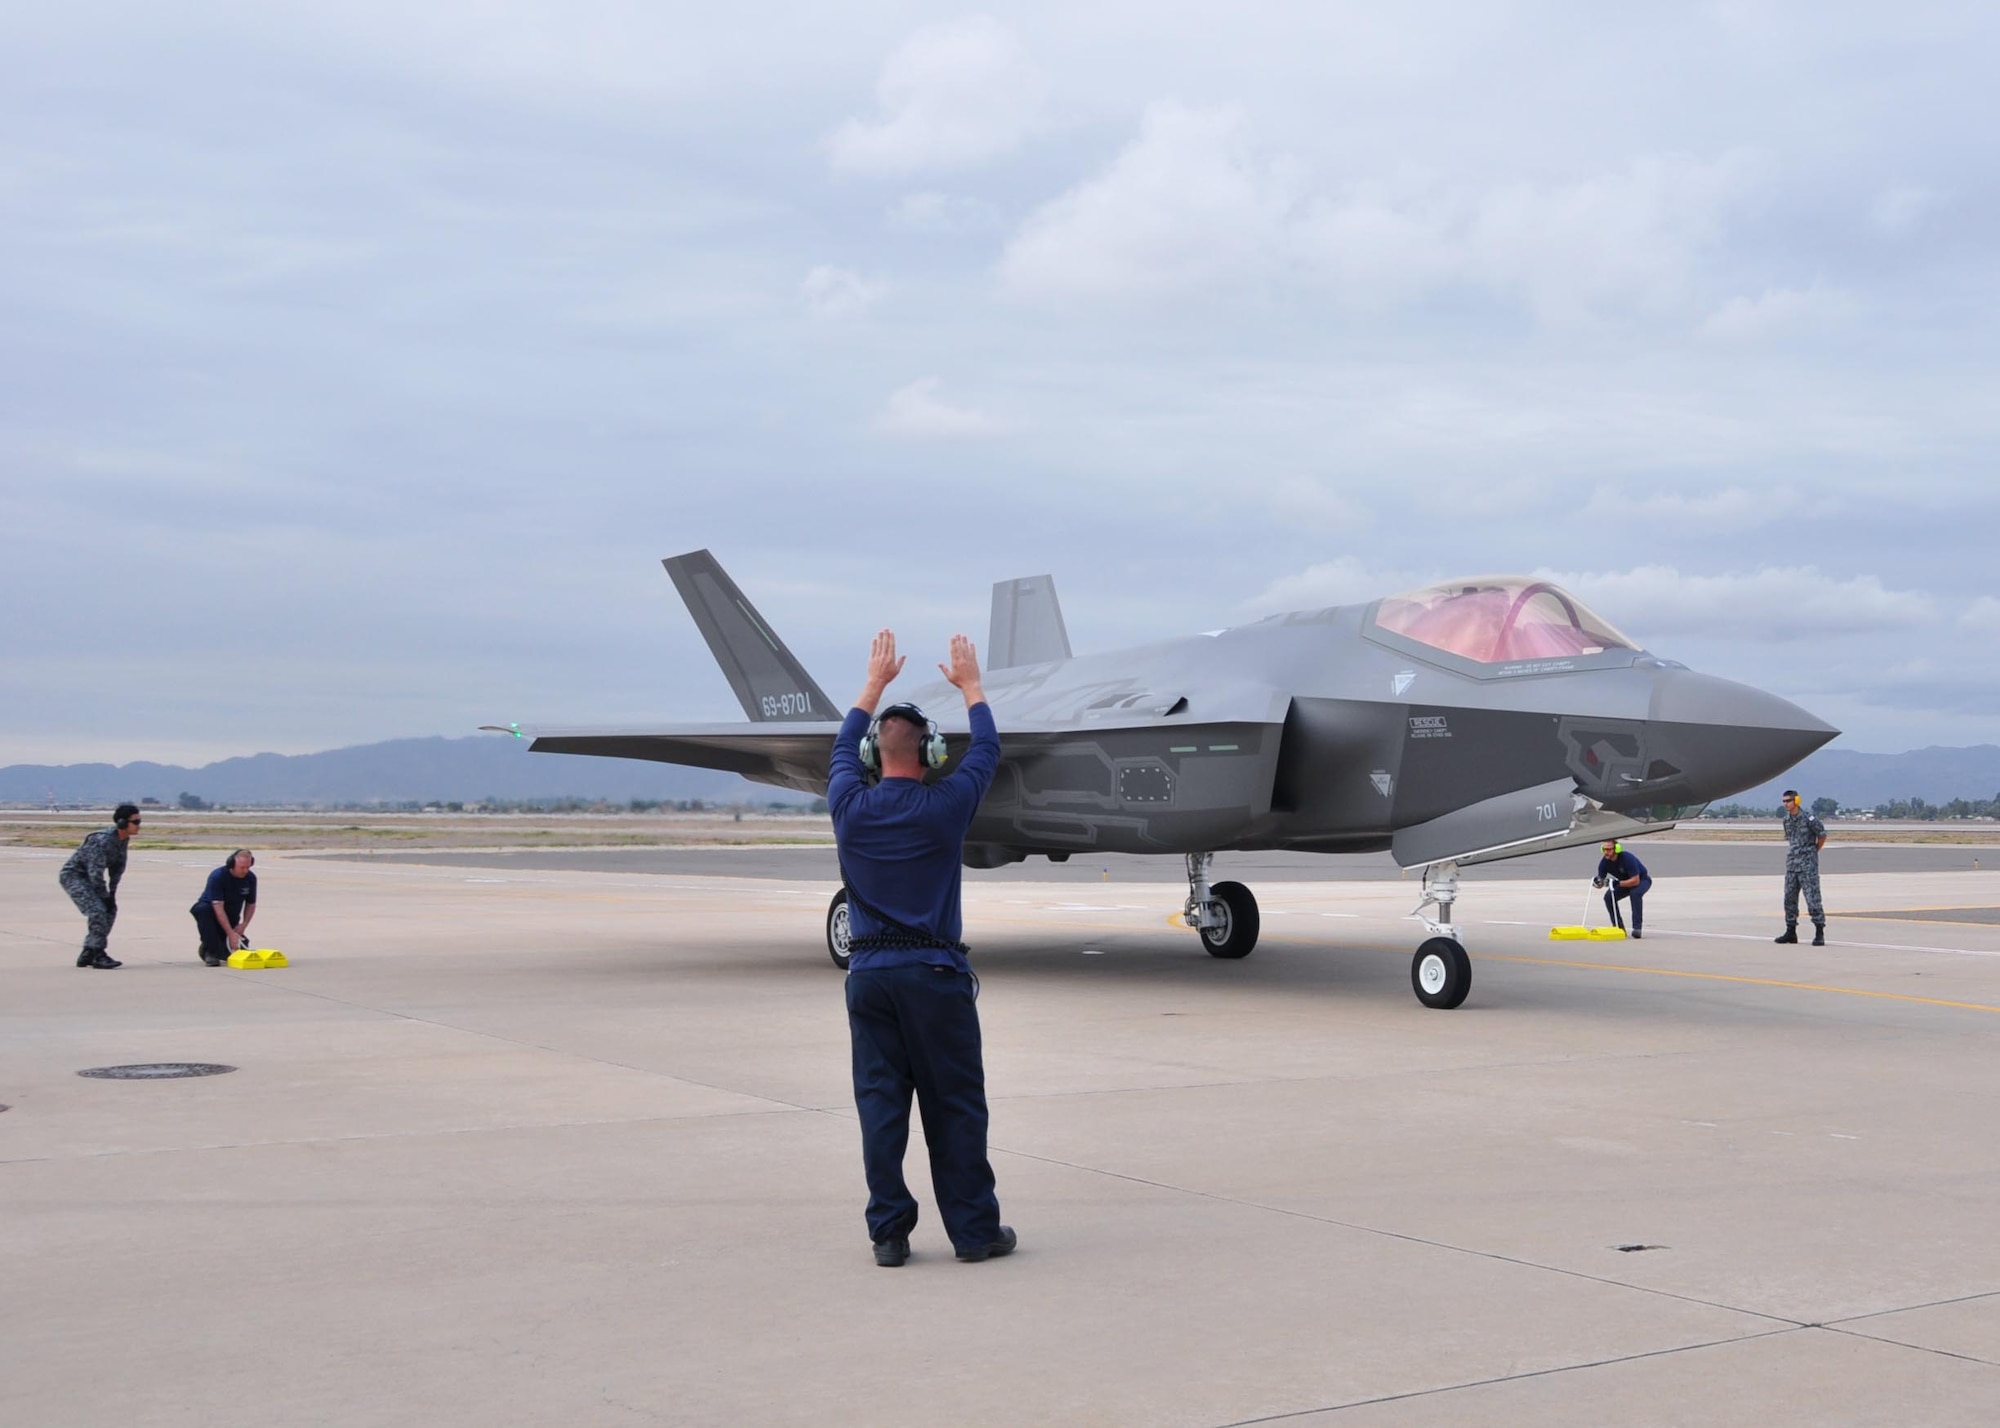 Lockheed Martin and Japanese Air Self-Defense Force personnel work together to taxi in the arrival of the first foreign military sales F-35A onto the 944th Fighter Wing ramp Nov. 28, 2016, at Luke Air Force Base, Ariz. The arrival marked the next step for the international F-35 training program. (U.S. Air Force photo/Tech. Sgt. Louis Vega Jr.)